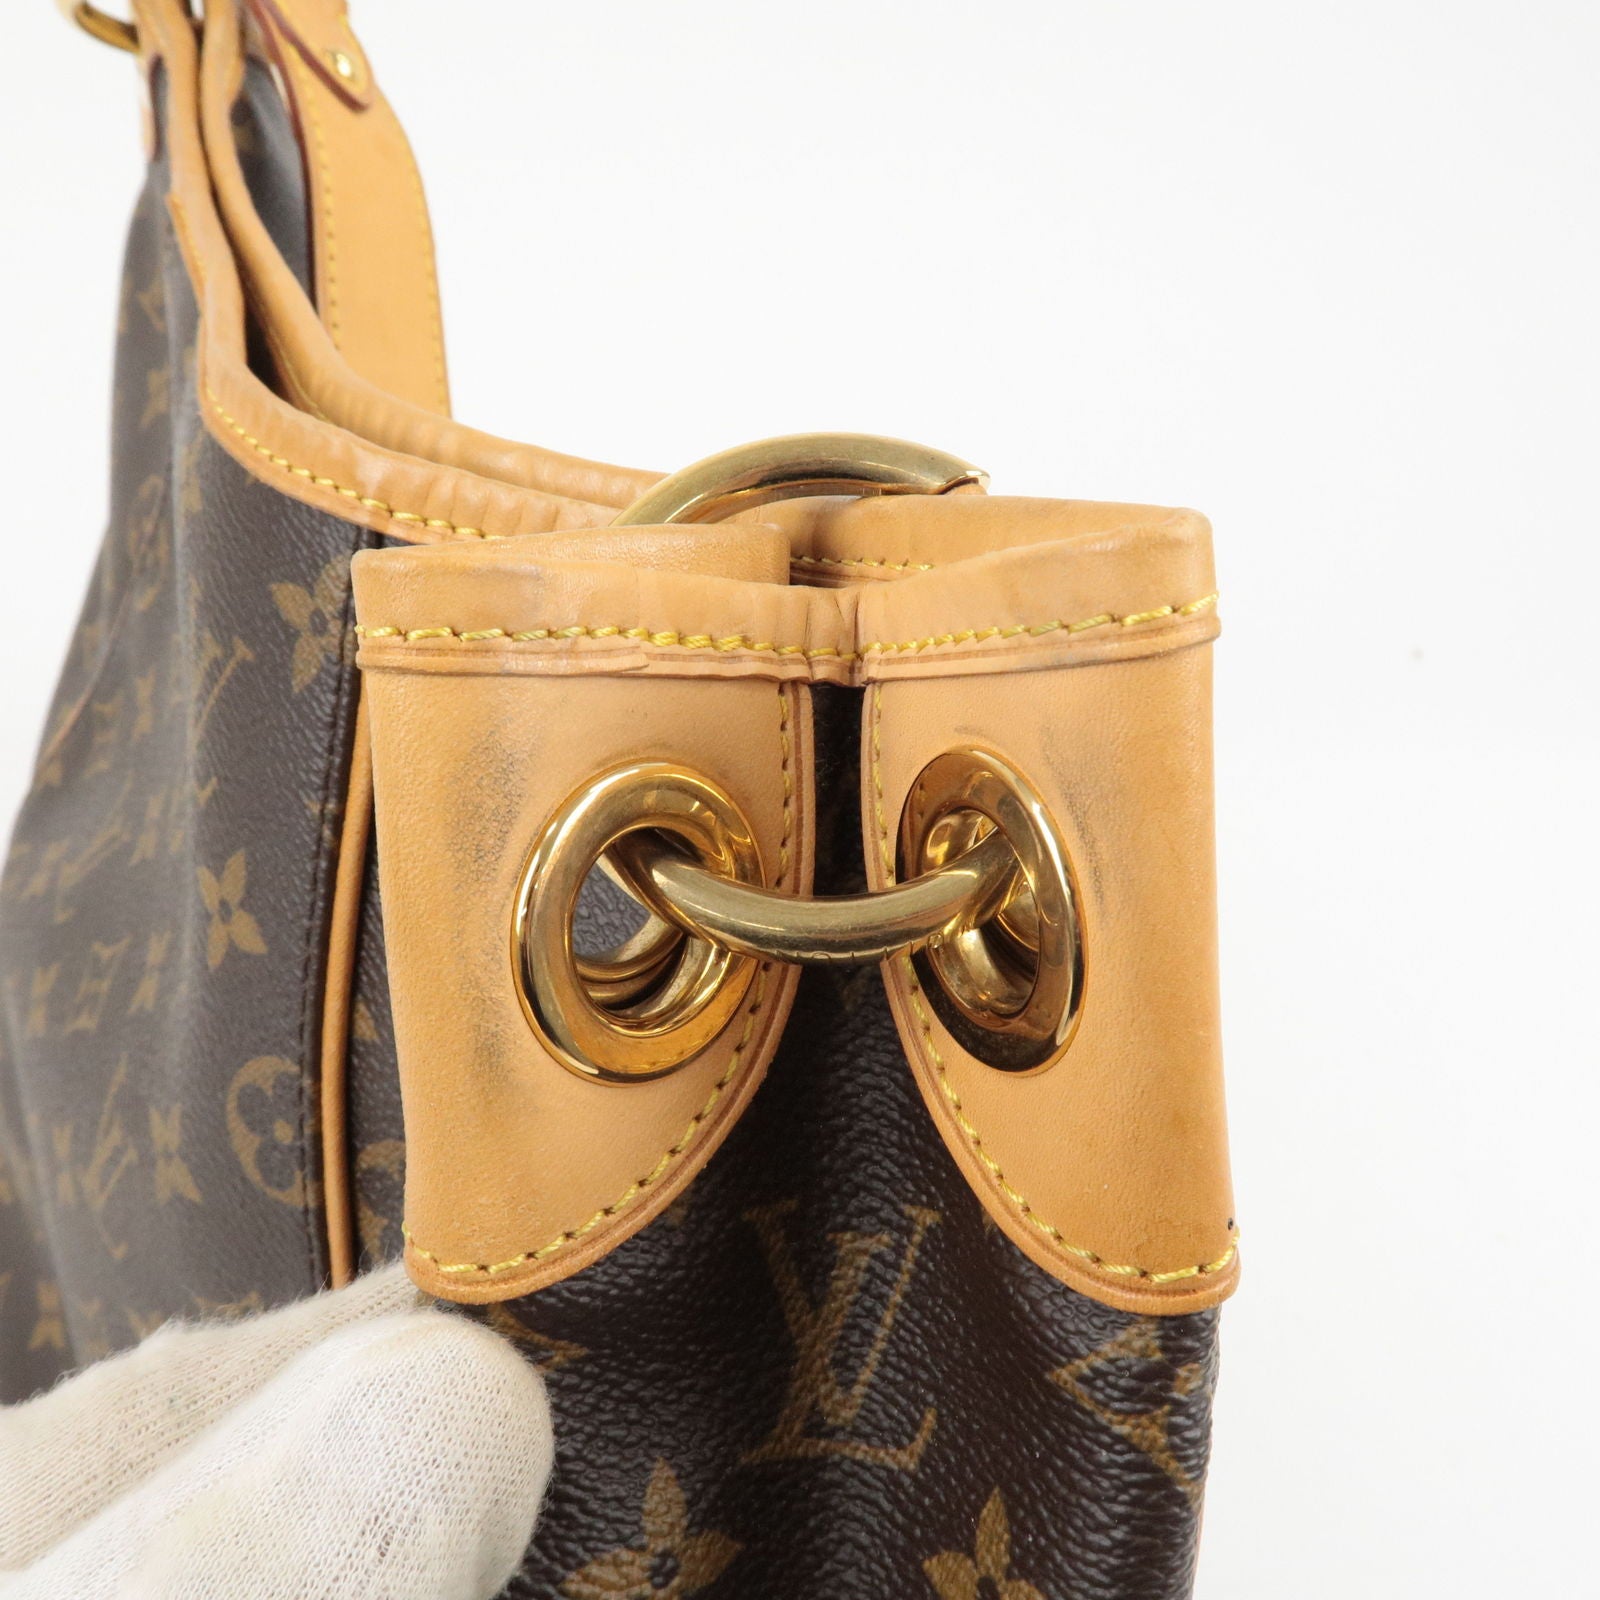 Louis Vuitton Galliera PM Bag in Monogram Canvas - Bags from David